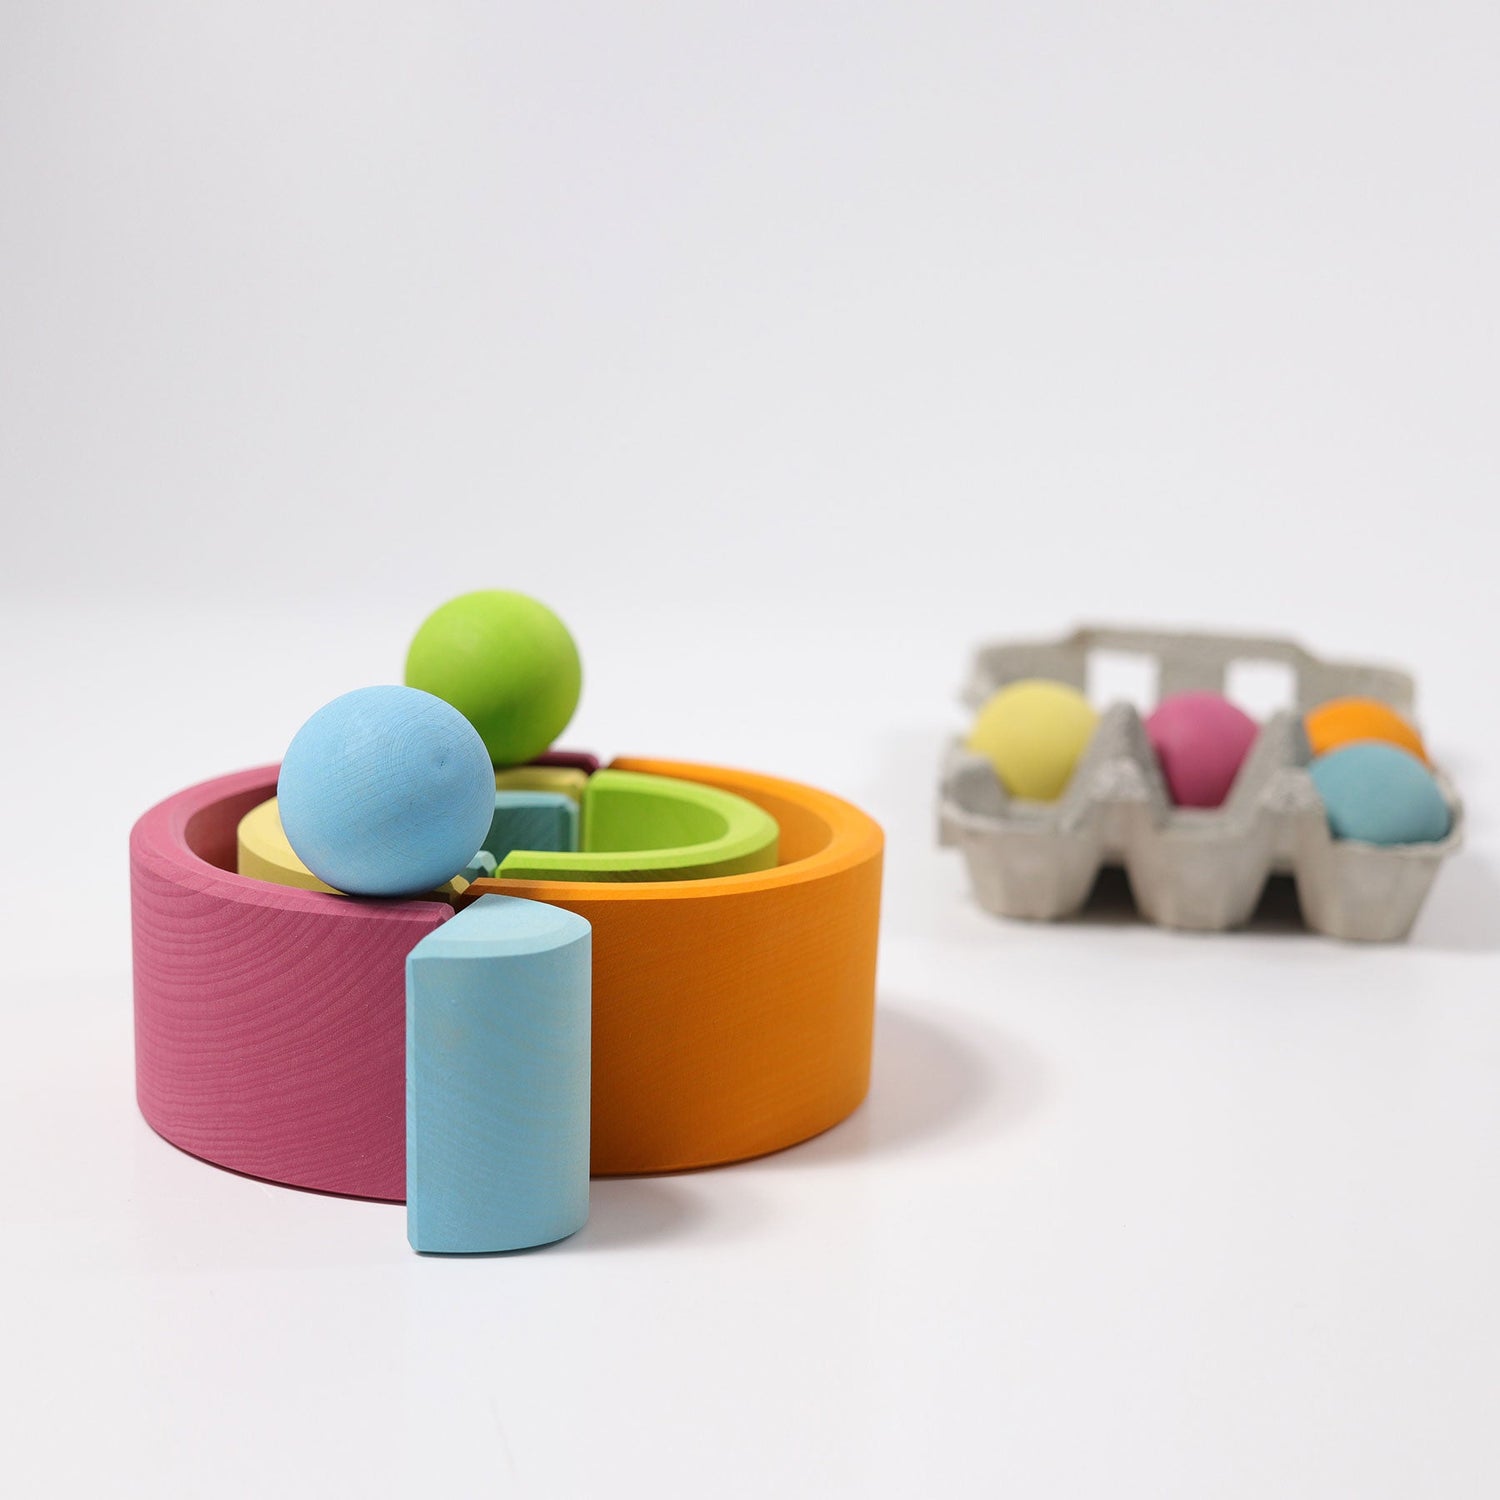 GRIMM'S | RAINBOW MEDIUM - PASTEL by GRIMM'S WOODEN TOYS - The Playful Collective